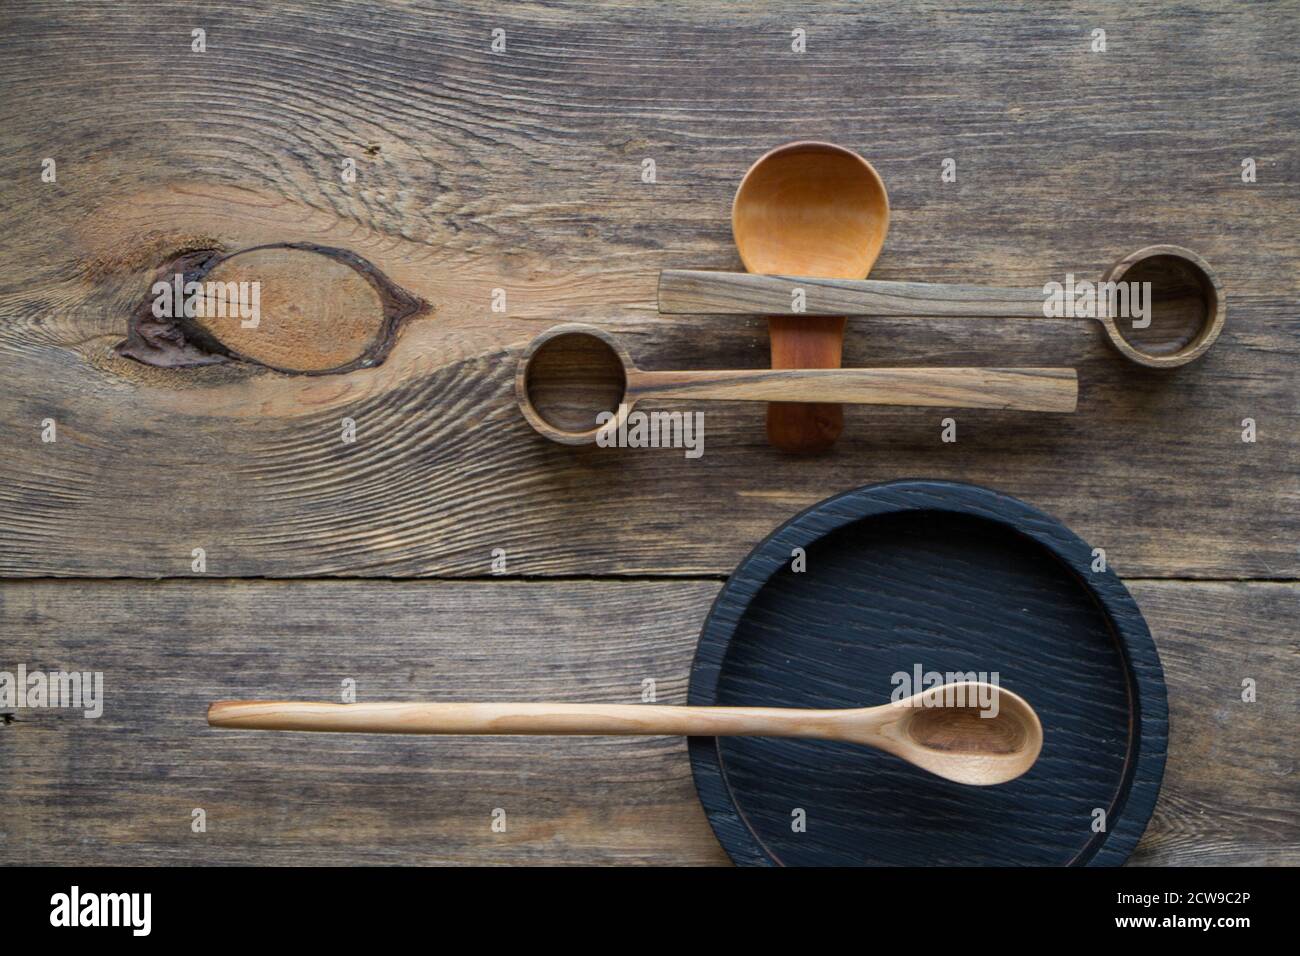 Top view wooden spoons and plates made of precious wood on wooden table, eco-friendly cutlery concept, selective focus Stock Photo